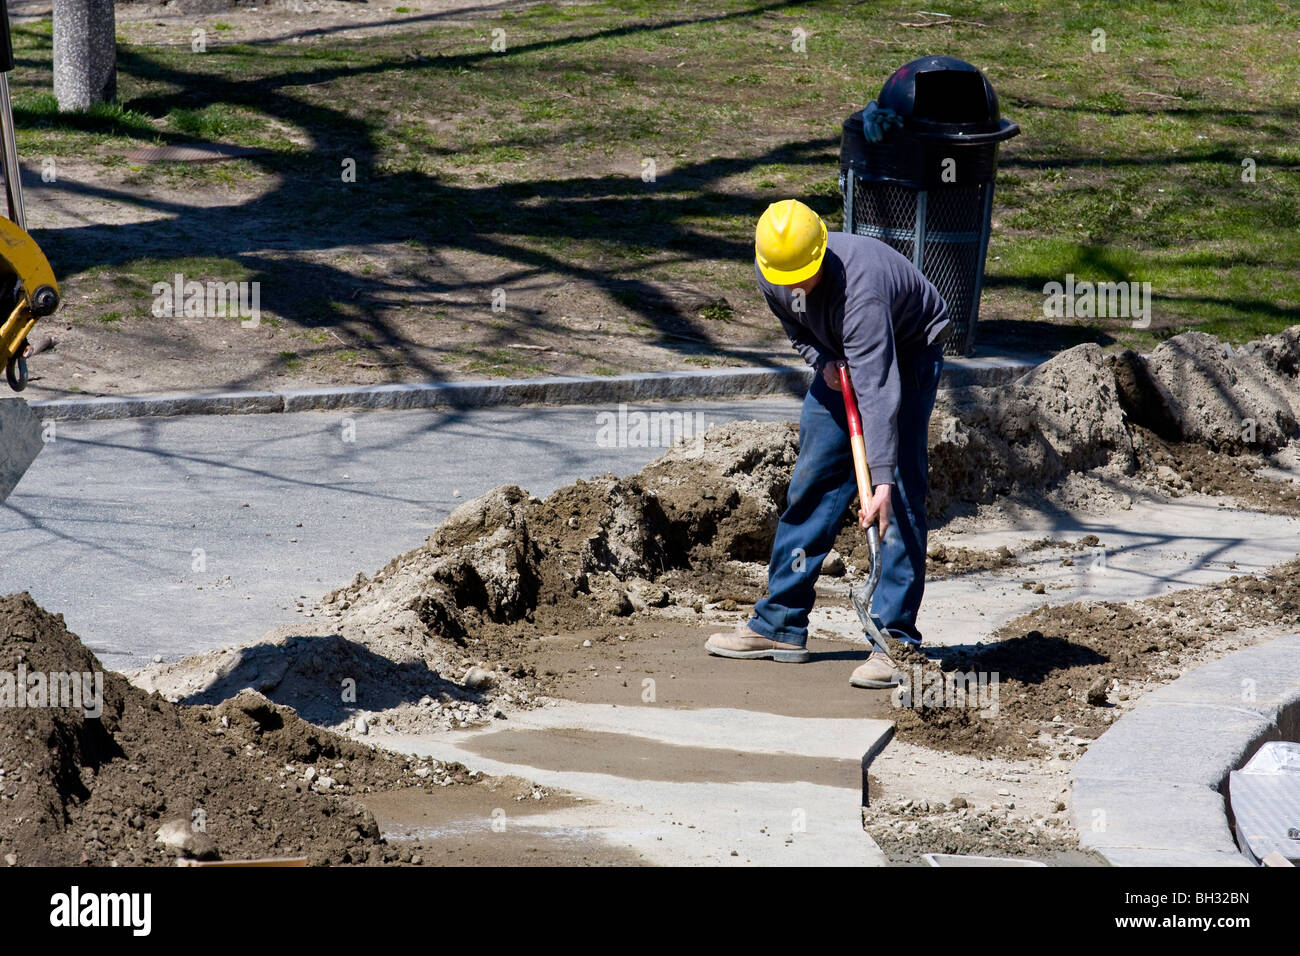 Construction worker with hardhat using a shovel. Stock Photo